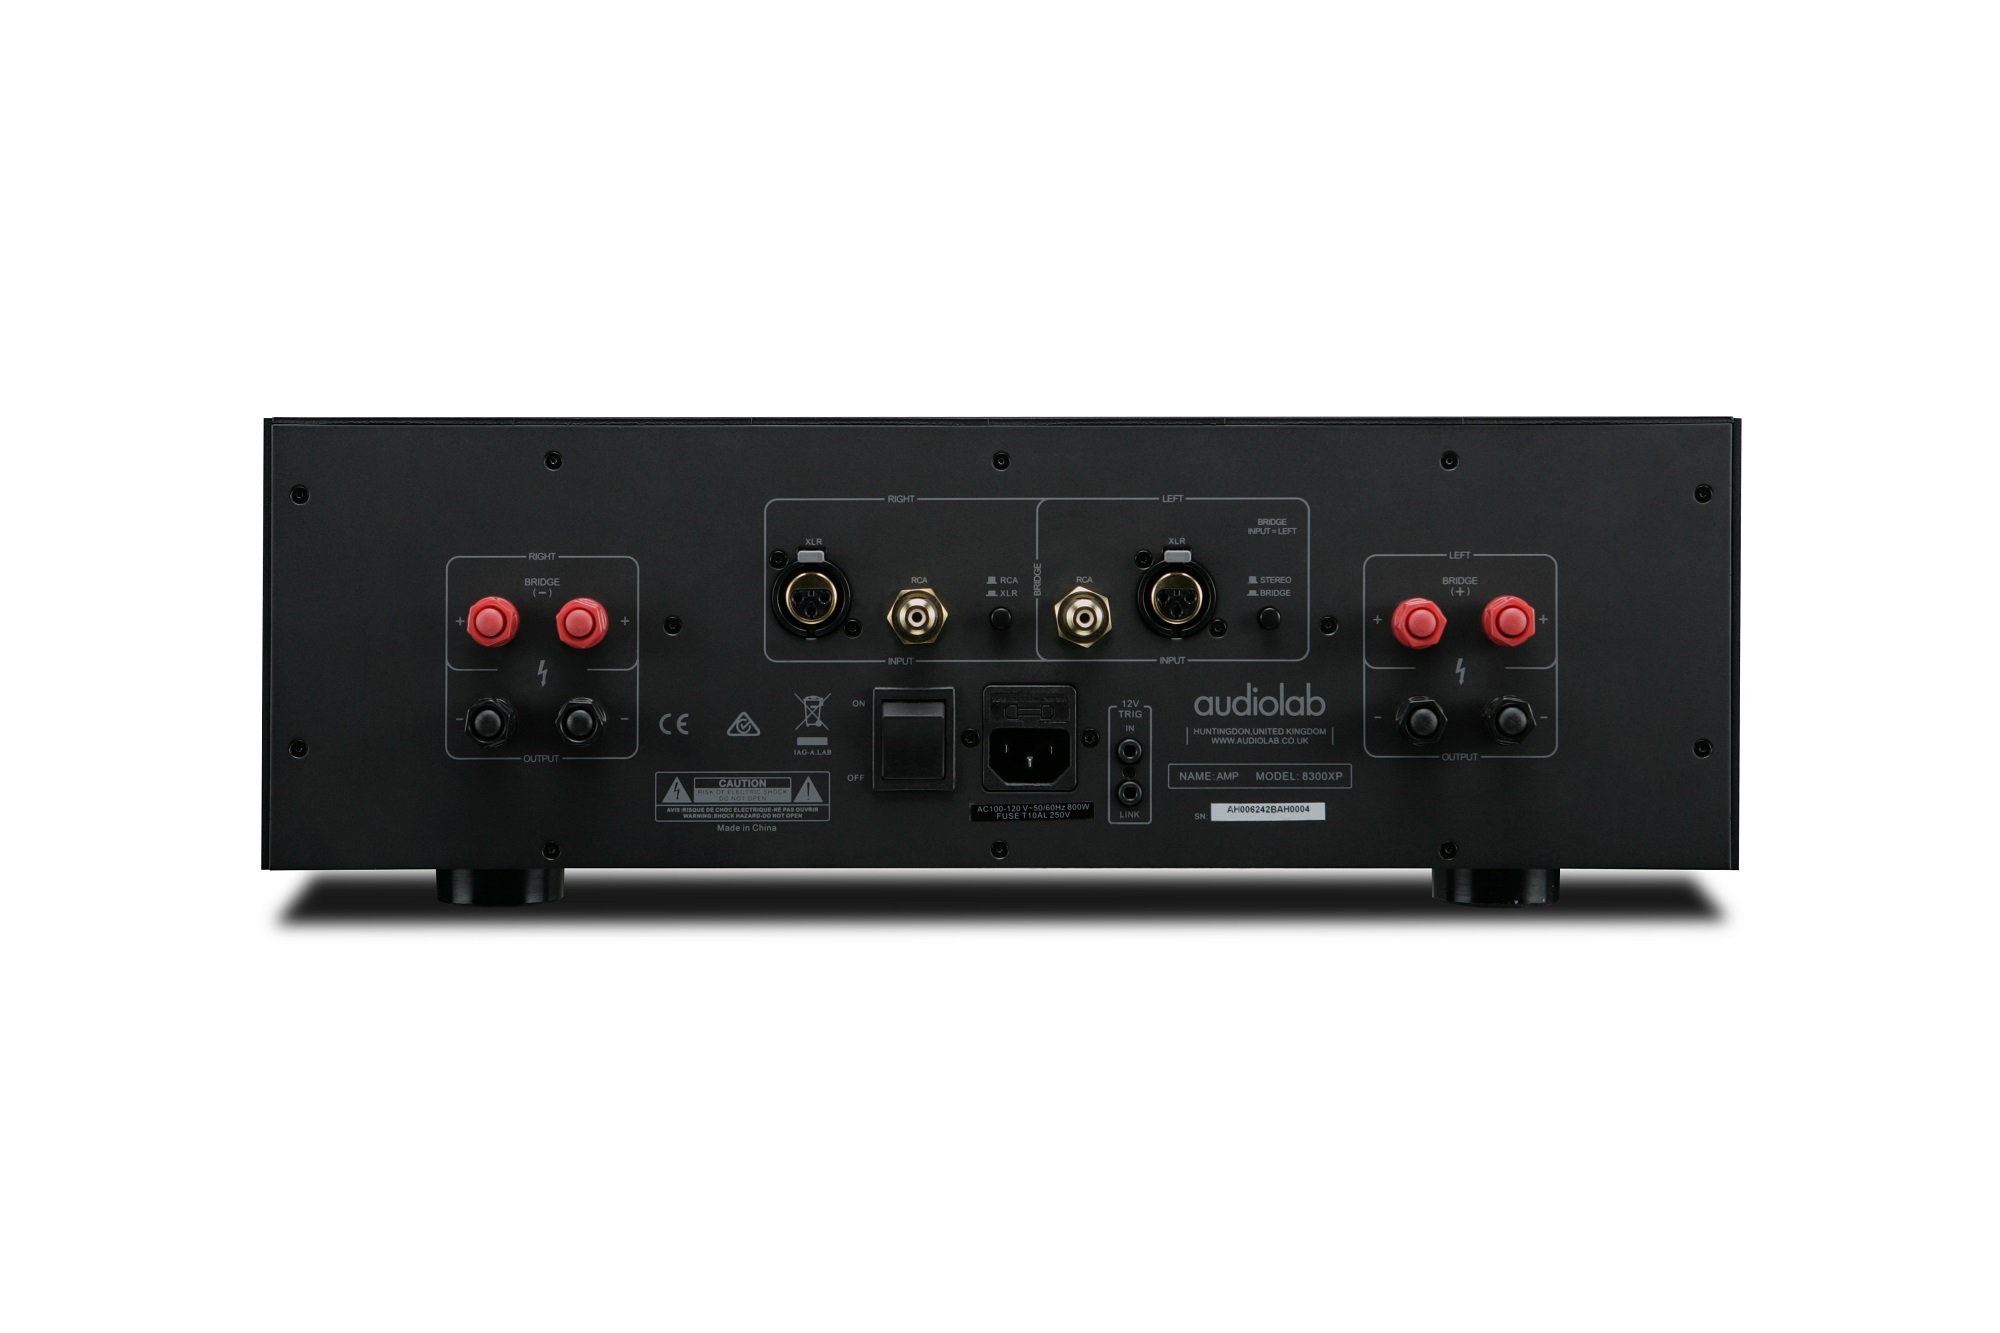 Audiolab 8300 XP Stereoendstufe